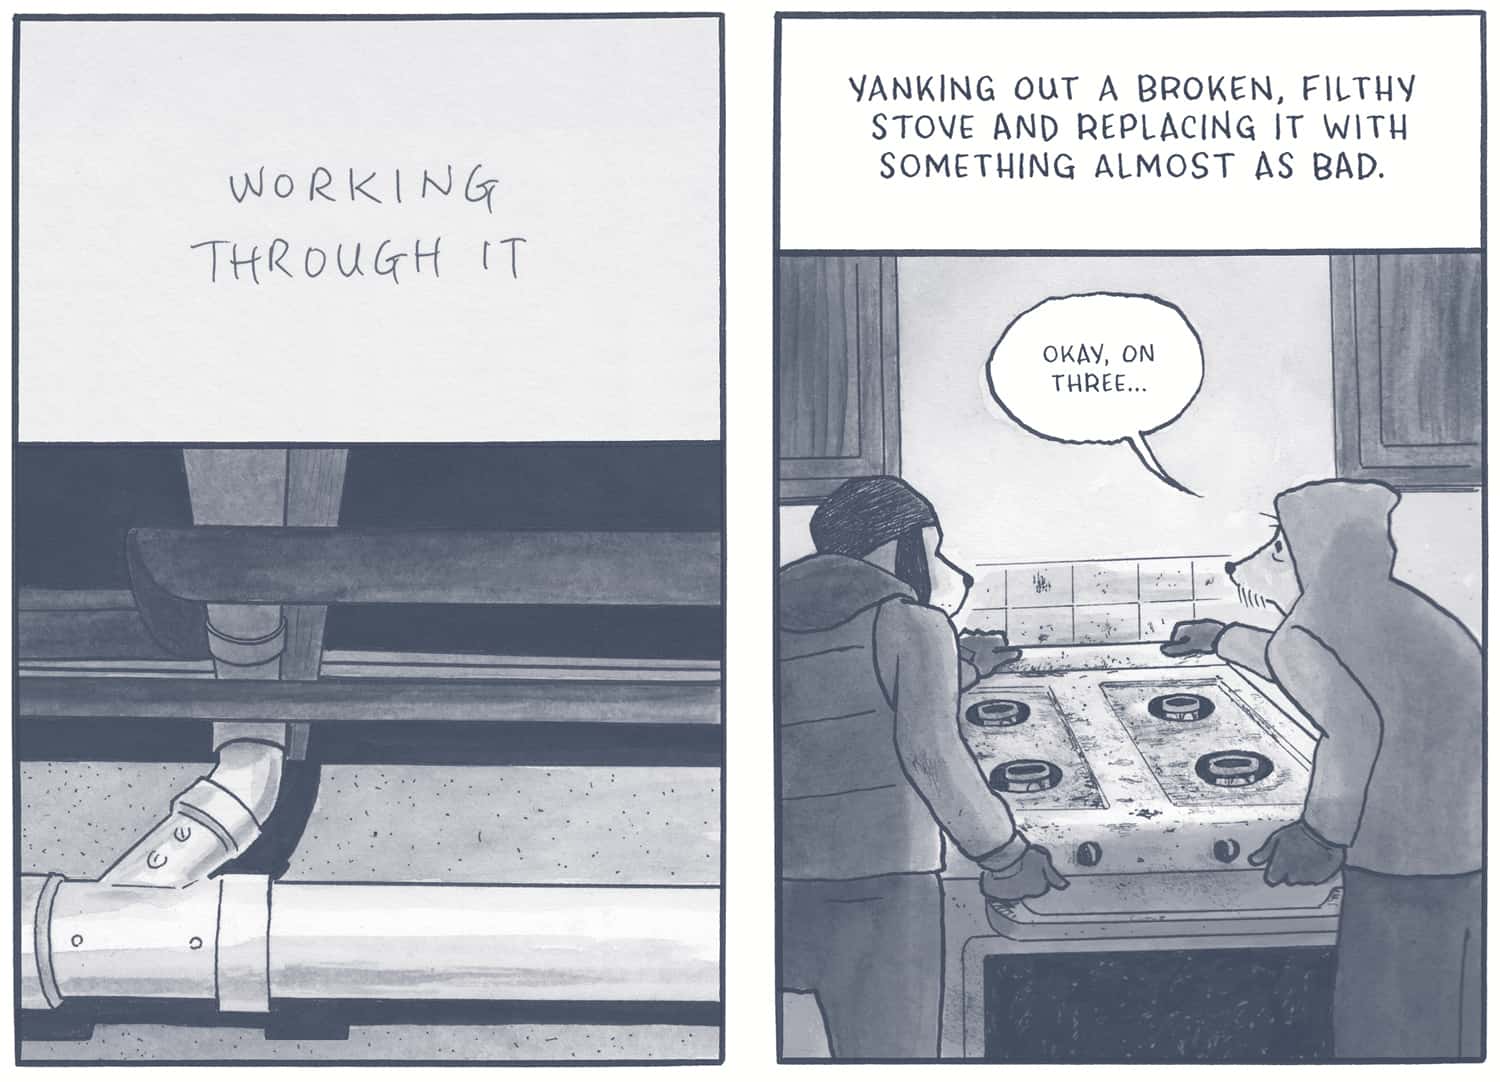 panel from Off Season by James Sturm